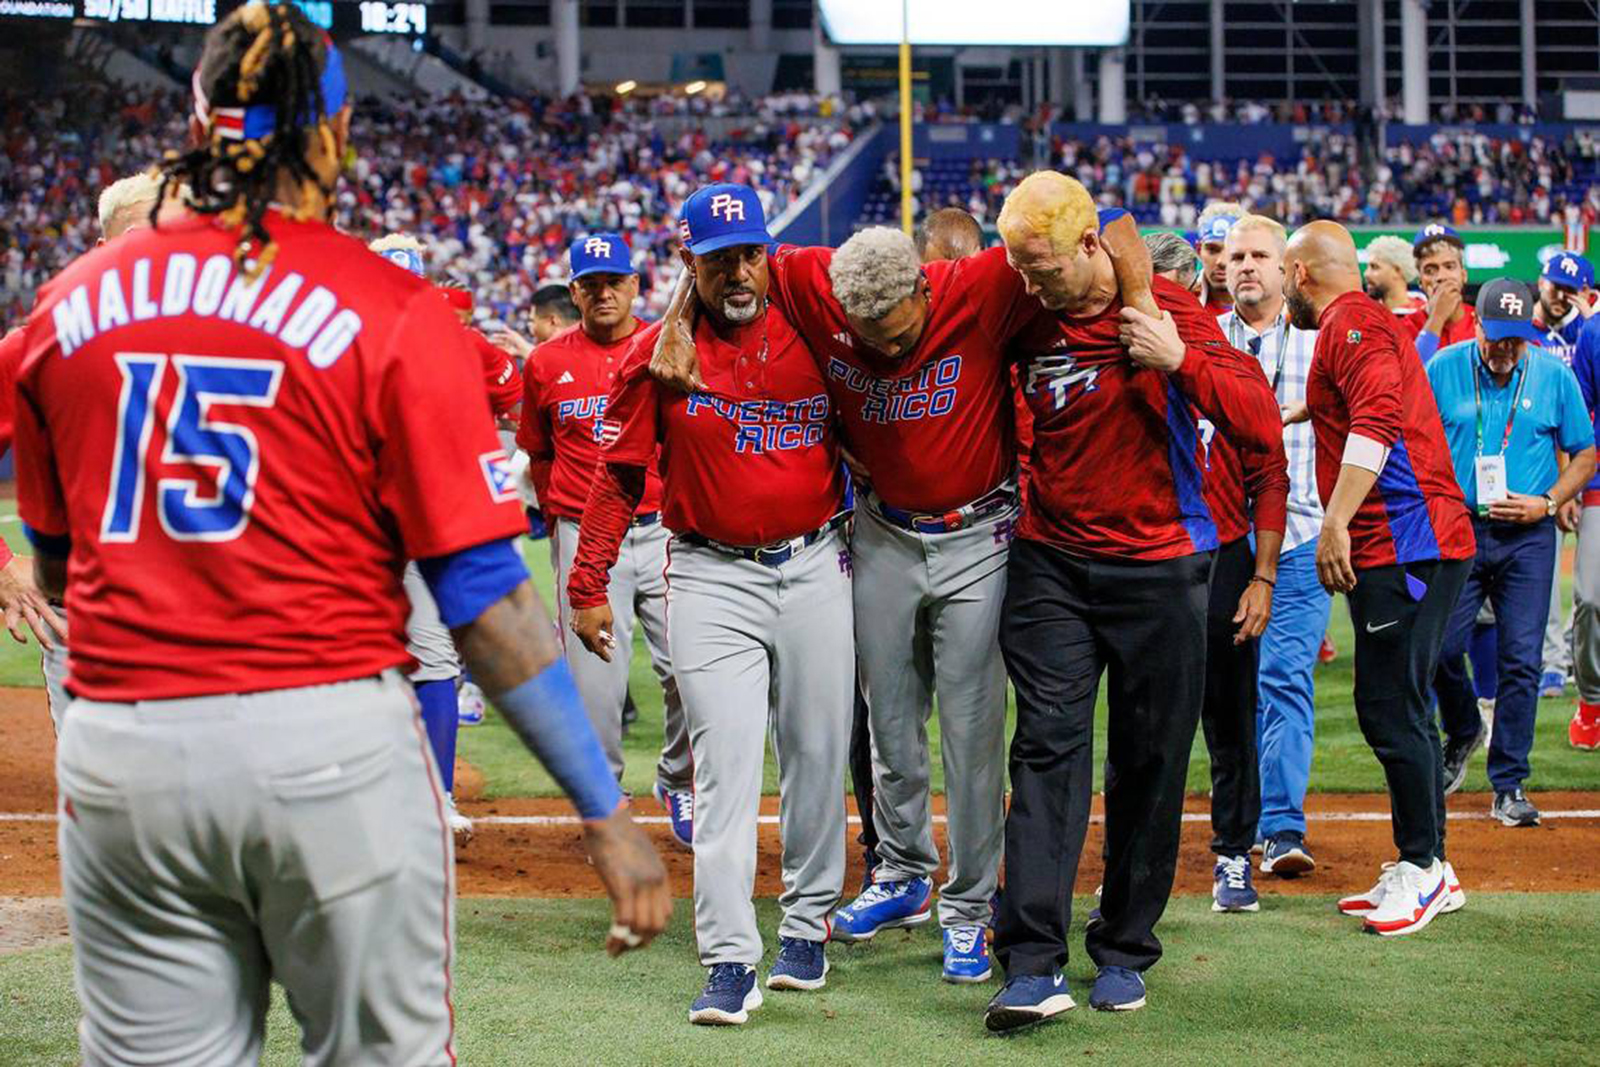 Edwin Diaz (C) of Puerto Rico is carried off the field afterthe 5-2 win over the Dominican Republic at the World Baseball Classic at LoanDepot Park in Miami, Florida, March 15, 2023. /CFP